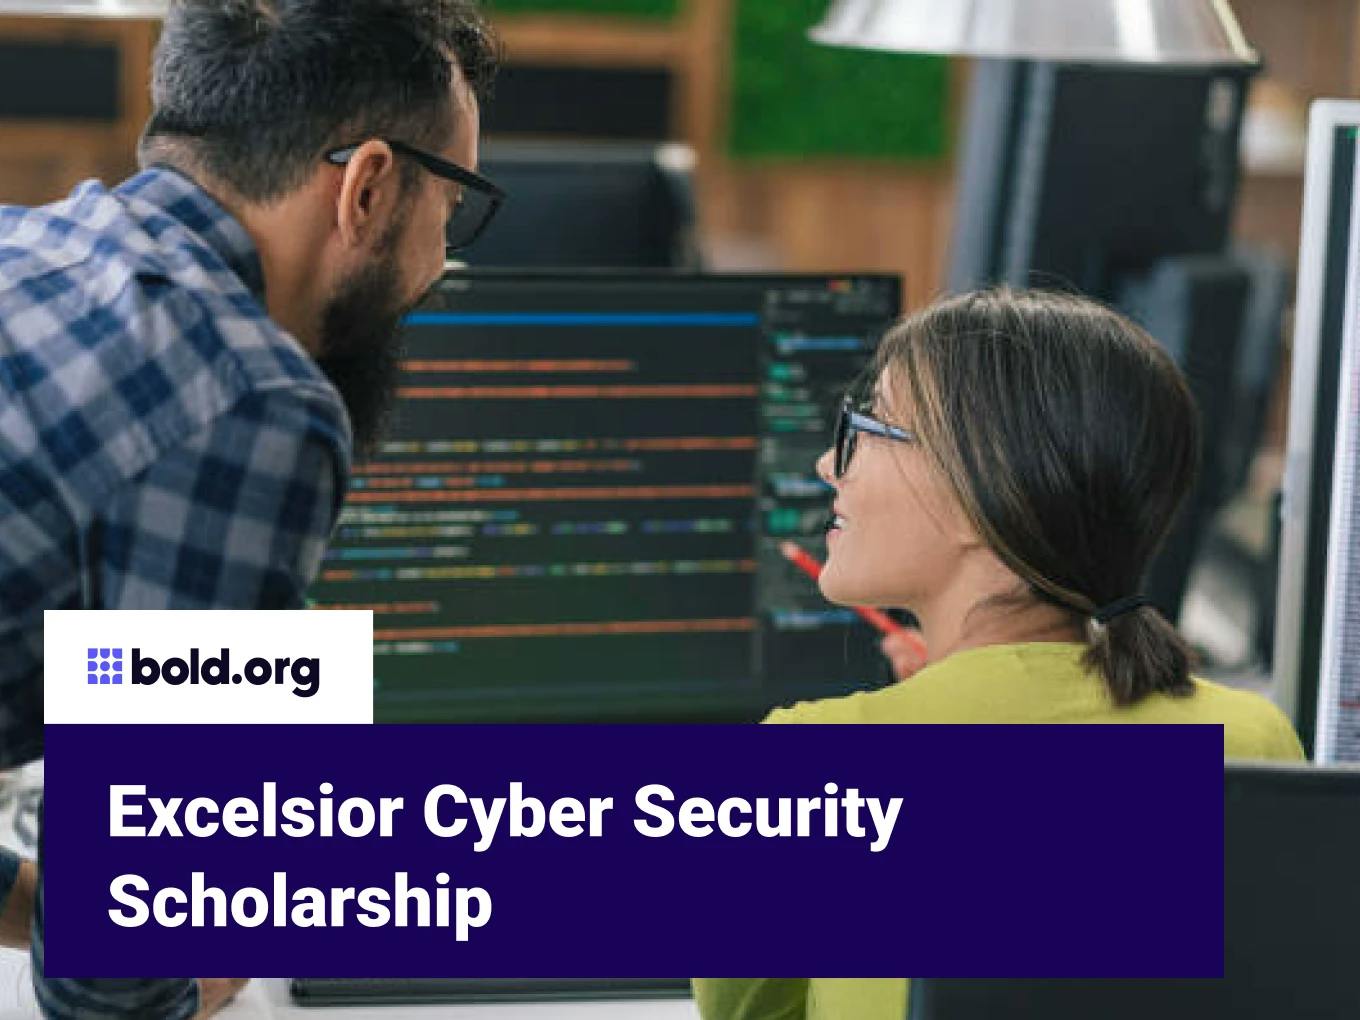 Excelsior Cyber Security Scholarship